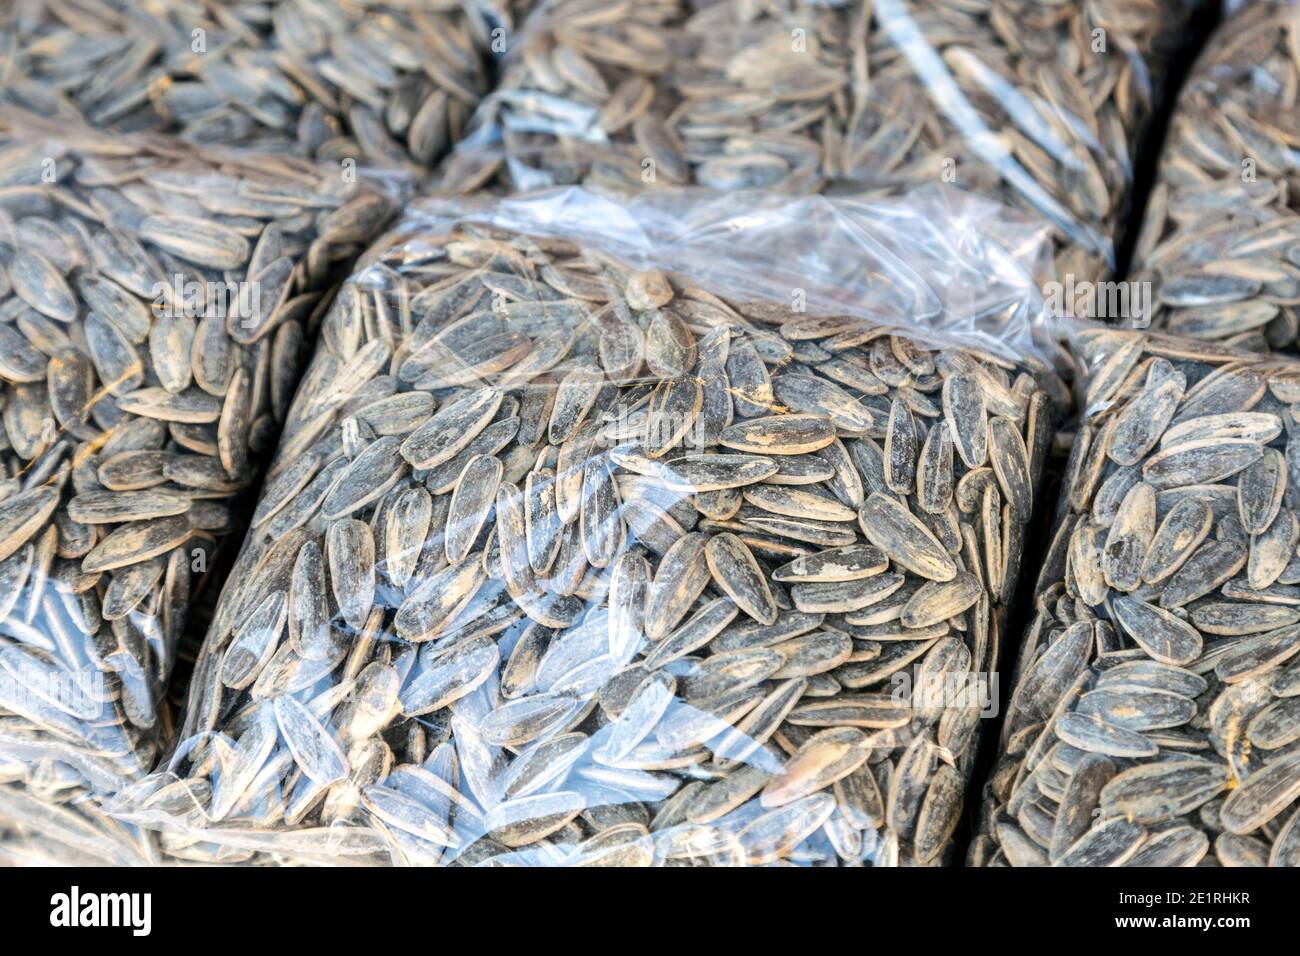 Packaged sunflower seeds in shells at a shope (Dalaman, Turkey) Stock Photo